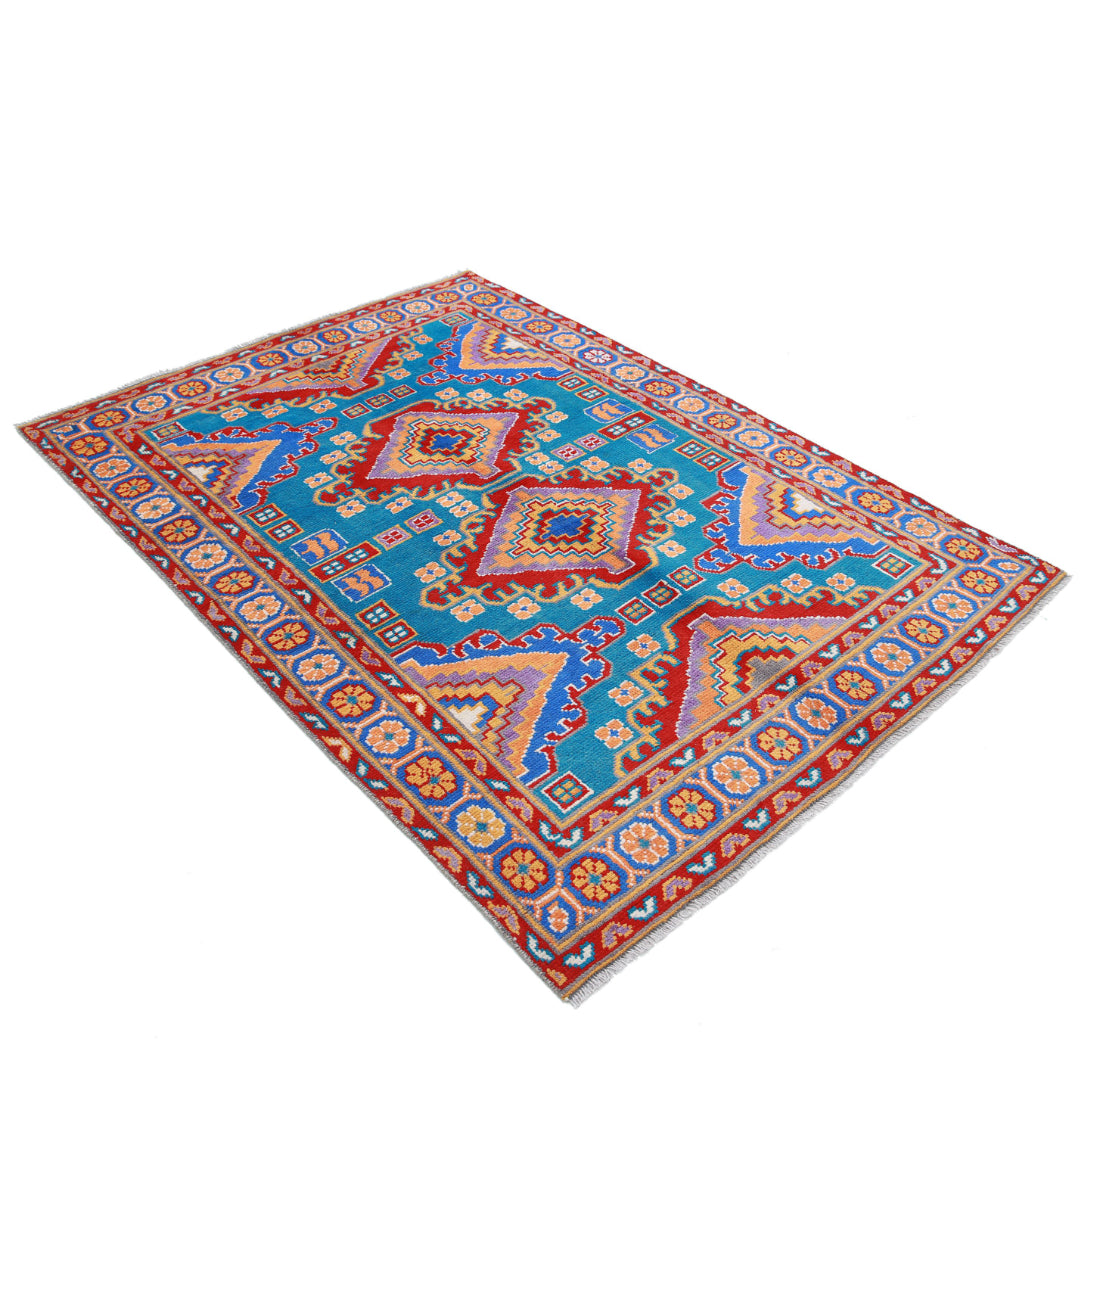 Revival 4'8'' X 6'8'' Hand-Knotted Wool Rug 4'8'' x 6'8'' (140 X 200) / Blue / Red